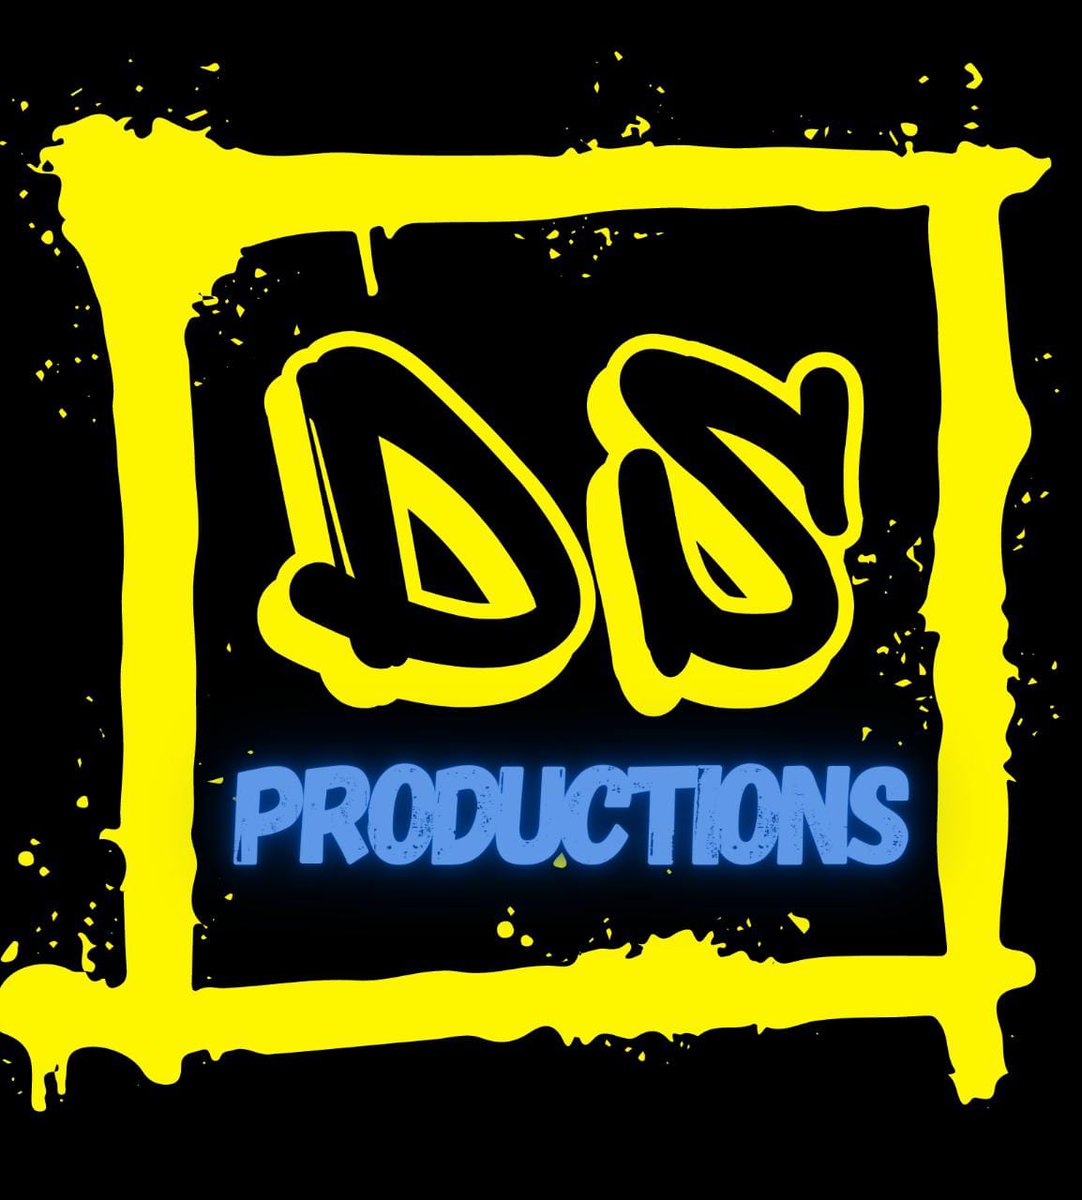 DS PRODUCTIONS is a company based in Cape Town who works under three tiers.
Entertainment 
Events 
Industrial Theatre
#trendingproductions
#artistsofchange 
#catalystsofchange 
#dsproductions 
#mamacry 
#onemanstand